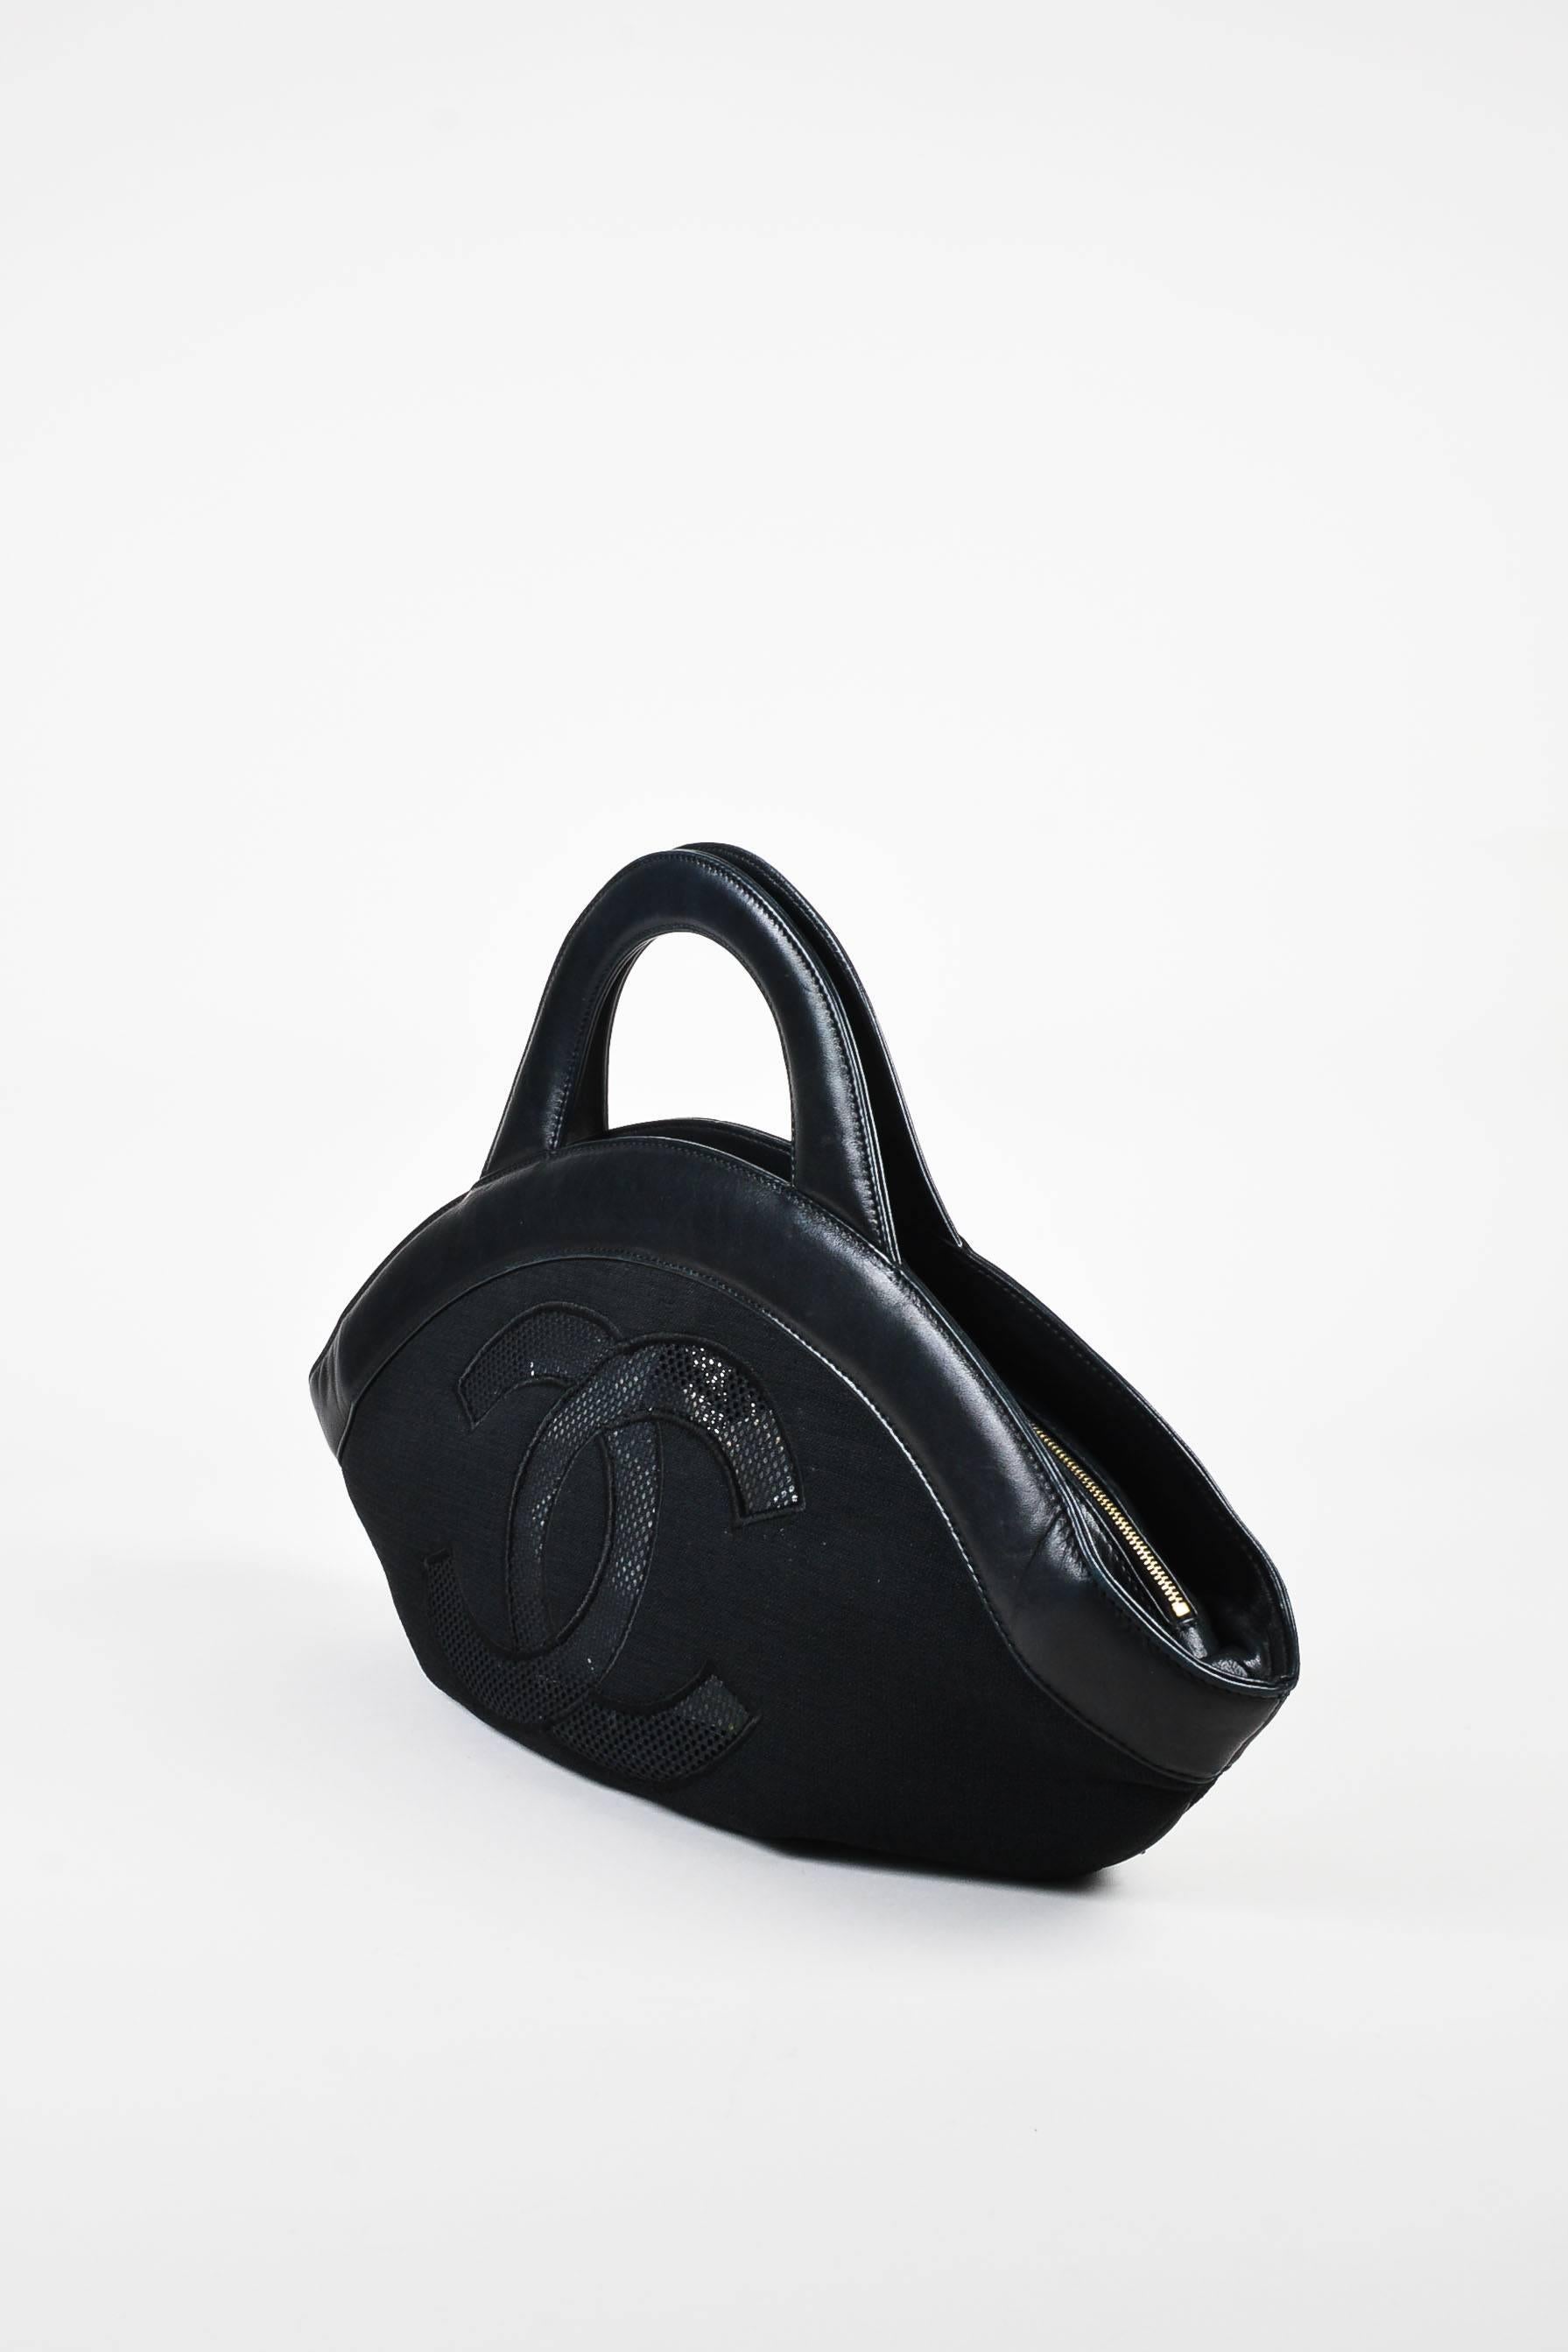 Black canvas handle bag from Chanel circa 2002-2003 has a black leather trim. The front of the bag features a mesh embroidered camellia flower, while the back features a mesh embroidered 'CC' logo. Two handles for wear. Top zipper for closure with a